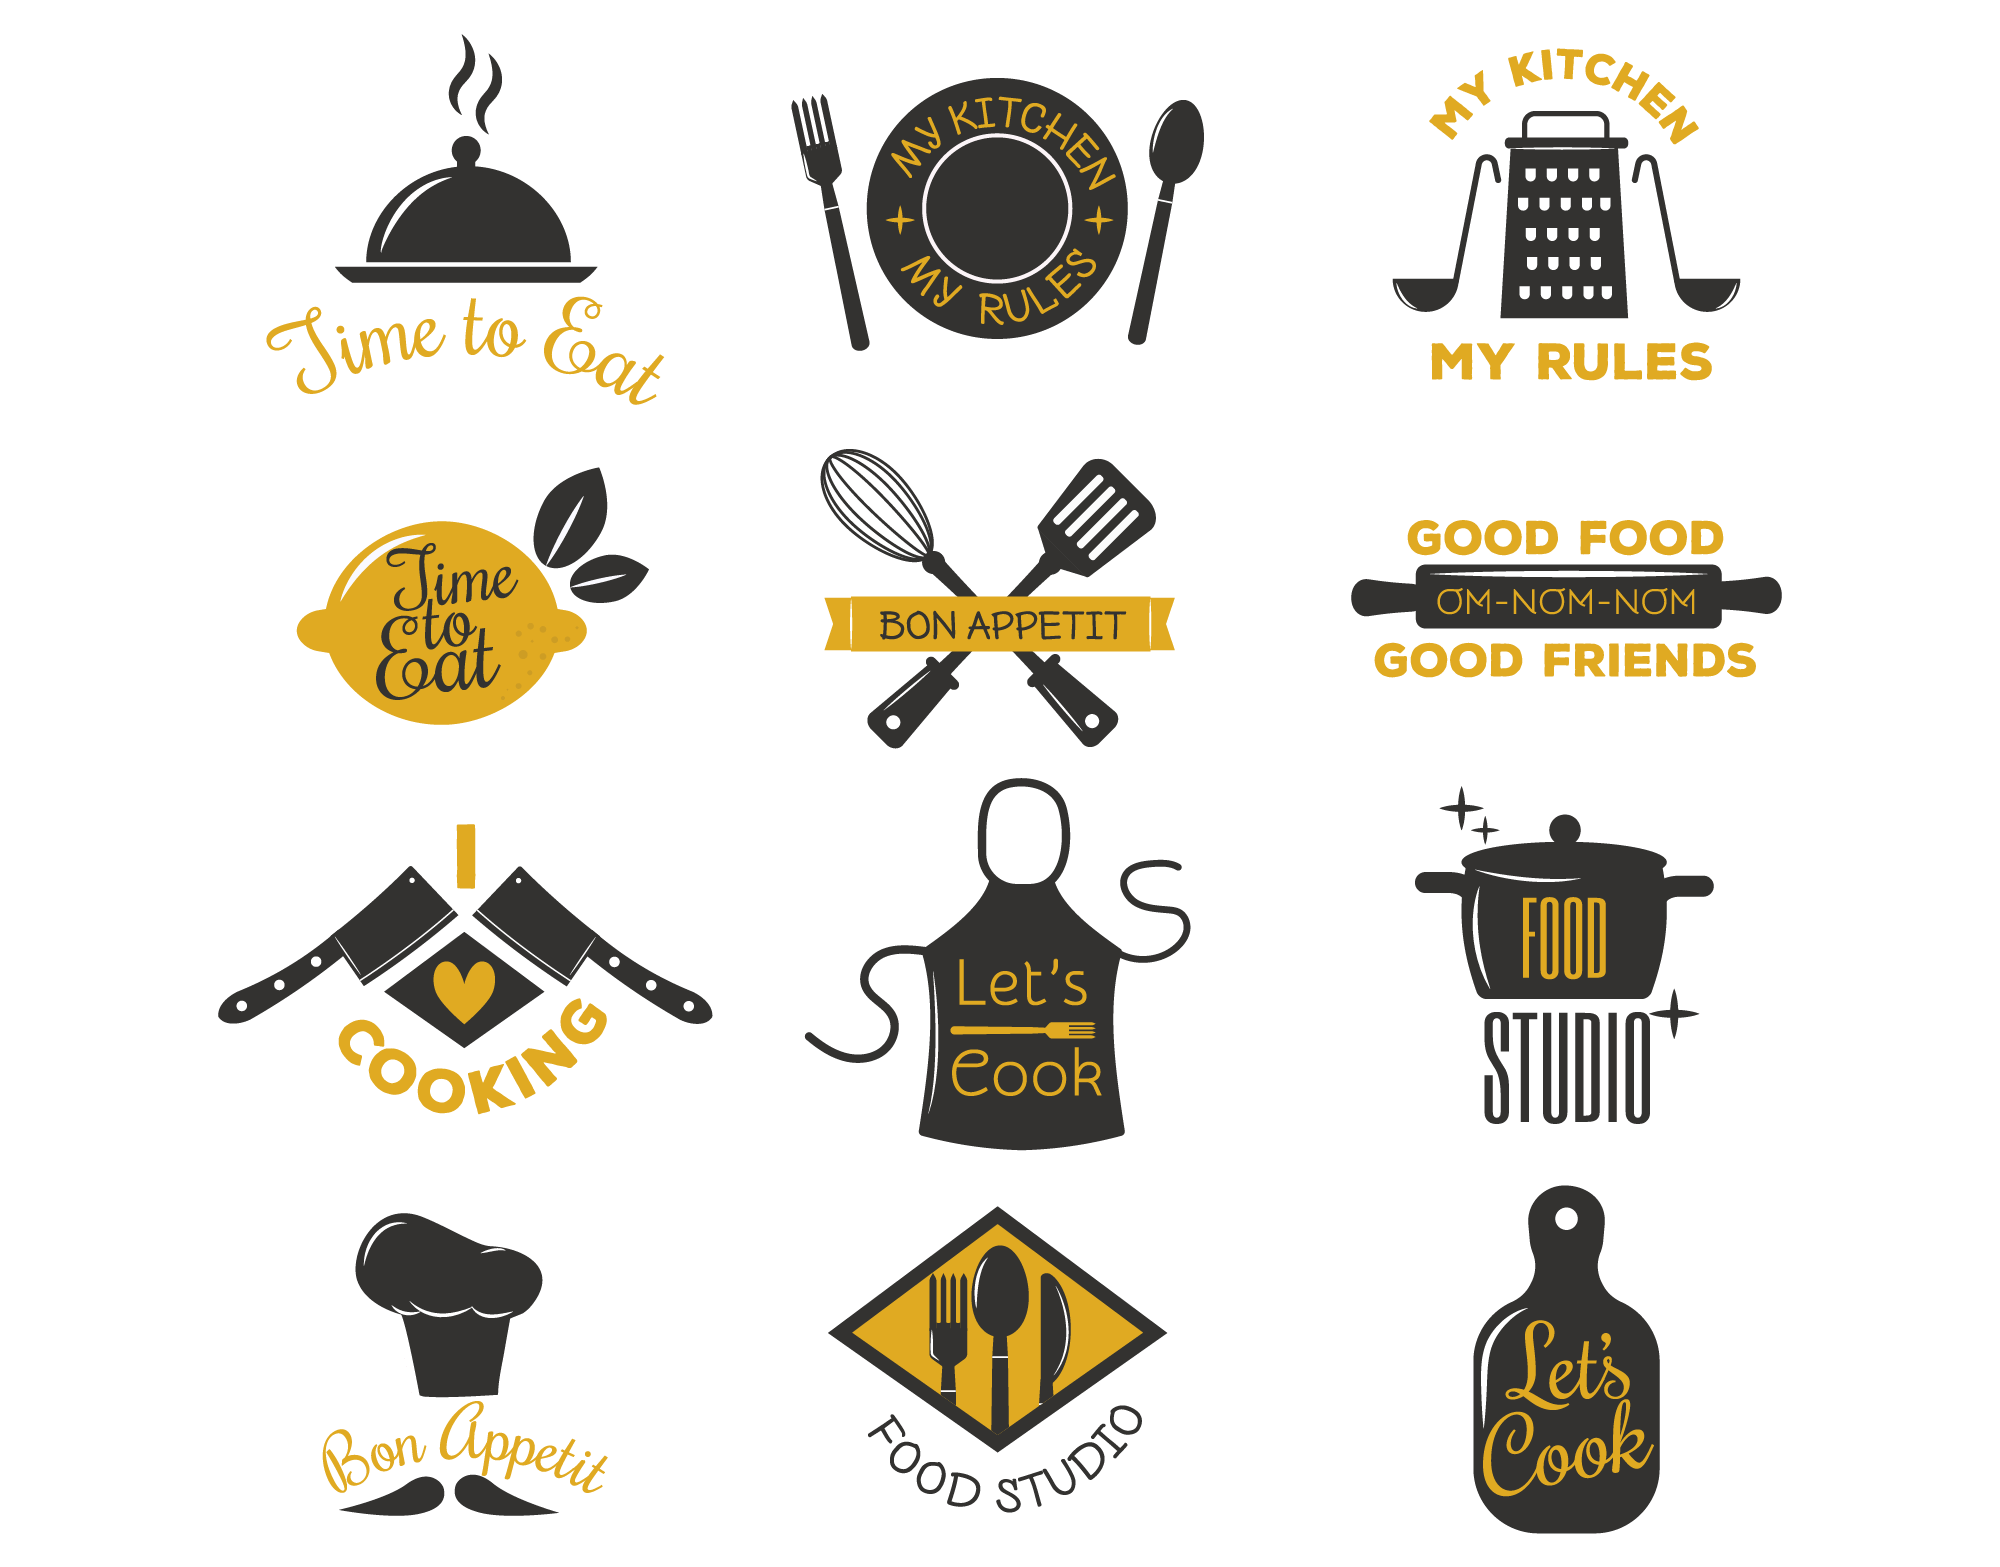 Catering Logo - Catering Logo Ideas to Appeal to Your Customers | Zillion Designs